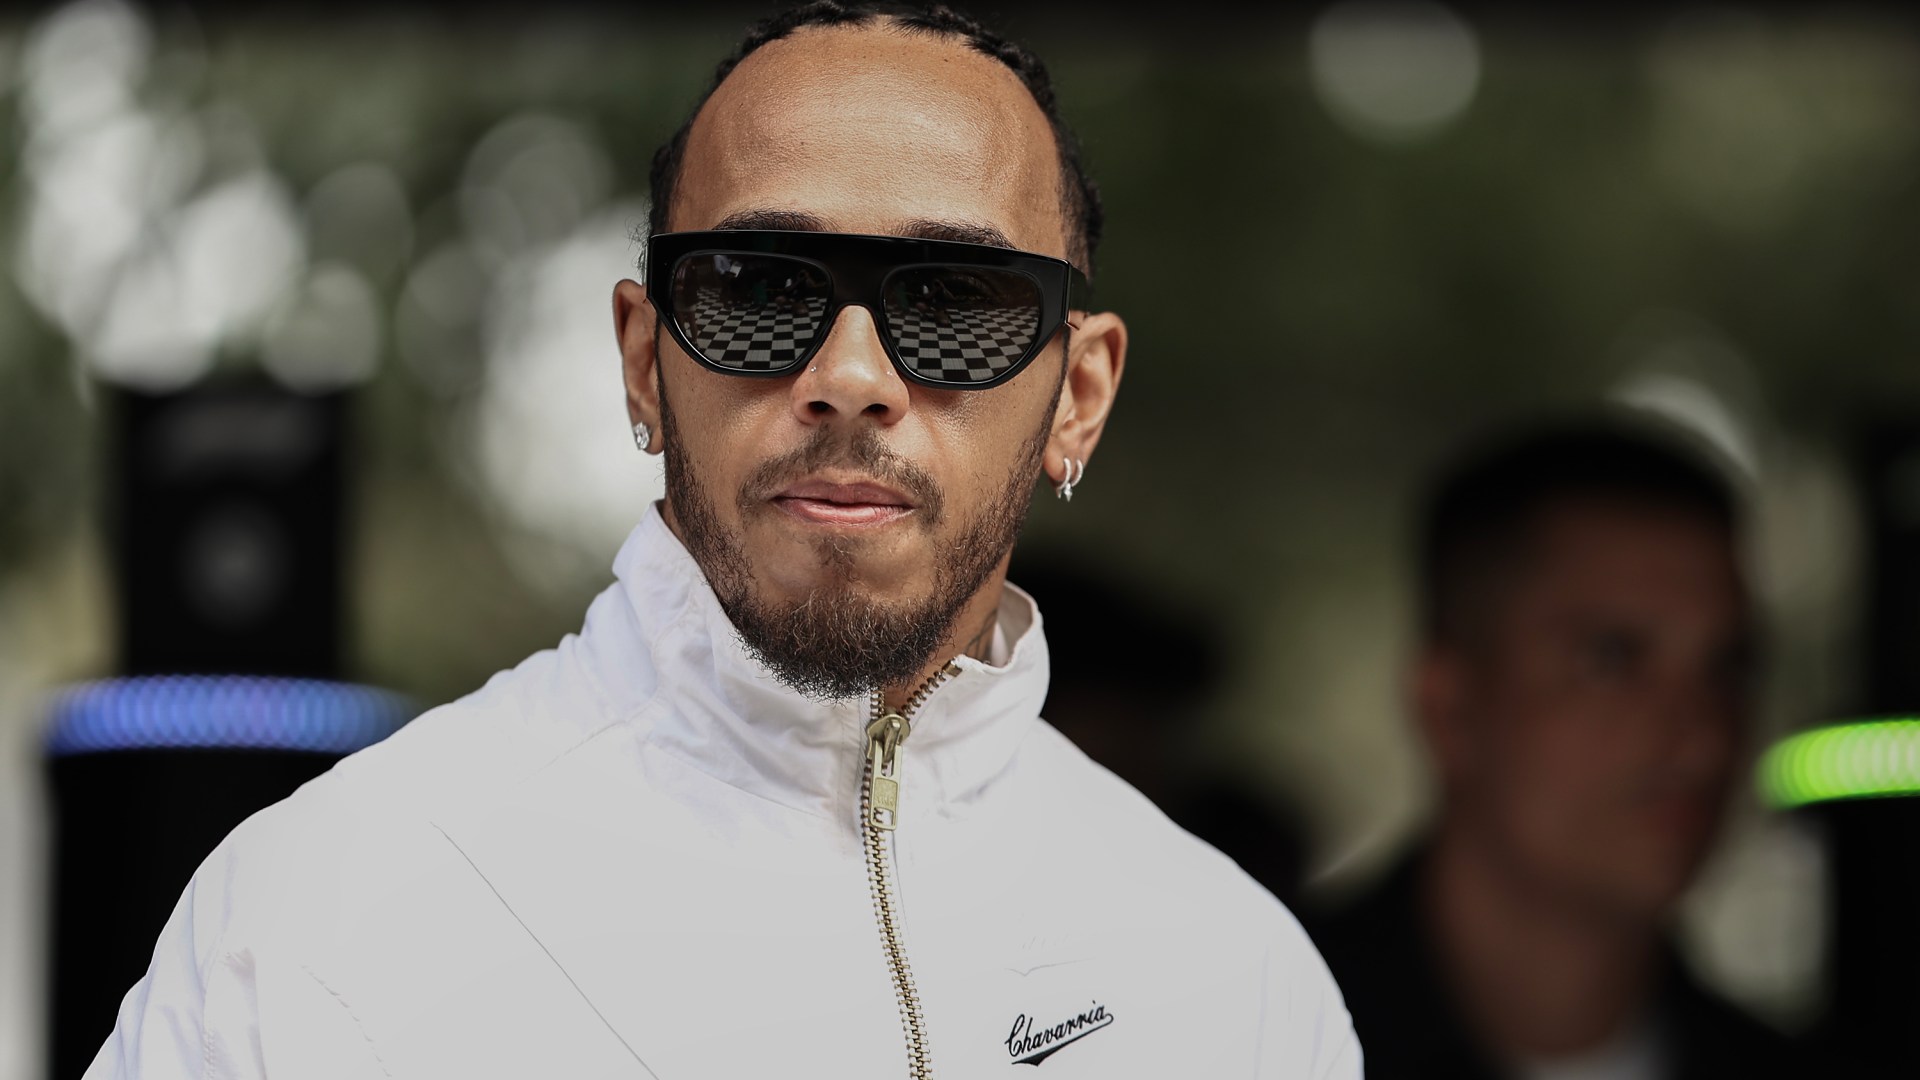 F1 legend, 36, breaks silence on shock retirement U-turn rumours and replacing Lewis Hamilton at Mercedes